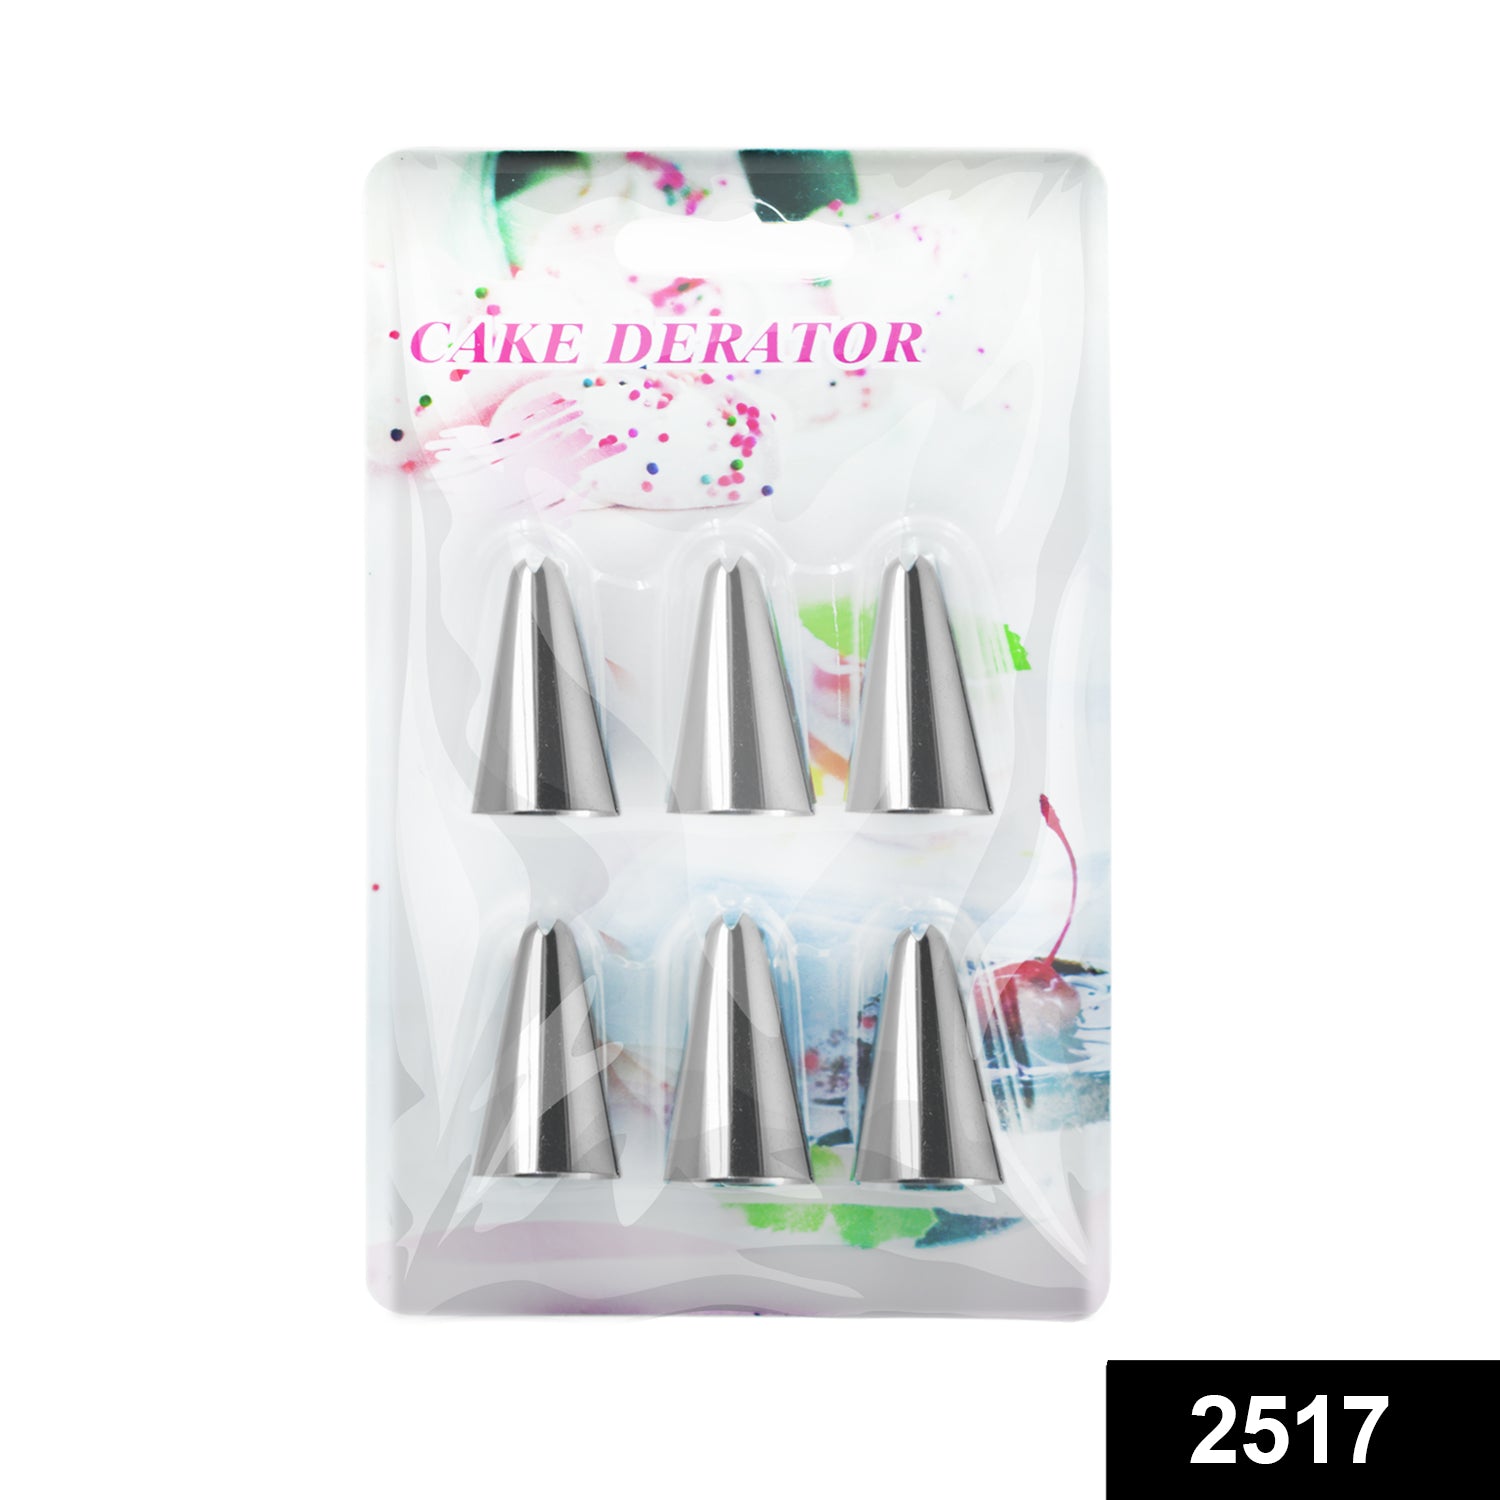 2517 Cake Decorating Stainless Steel Nozzle (6pcs) - China, 0.064 kgs